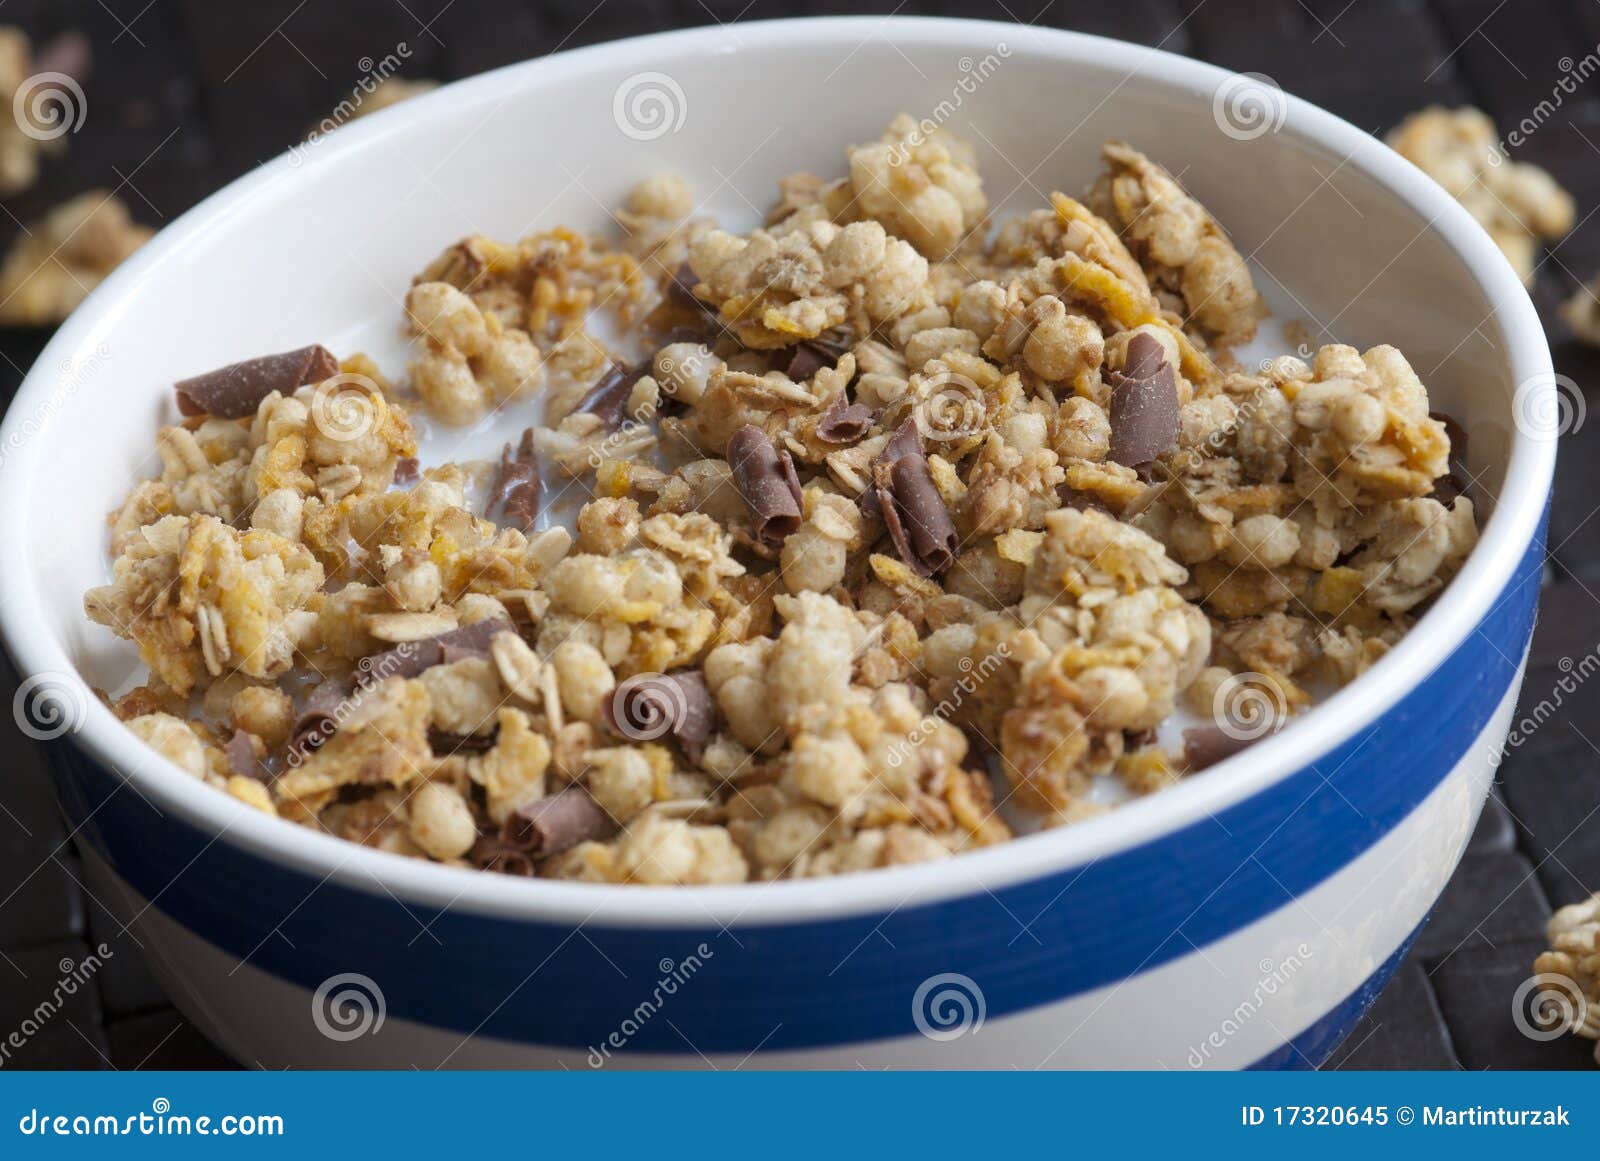 Crunchy nut clusters stock image. Image of milk, nutrition - 17320645